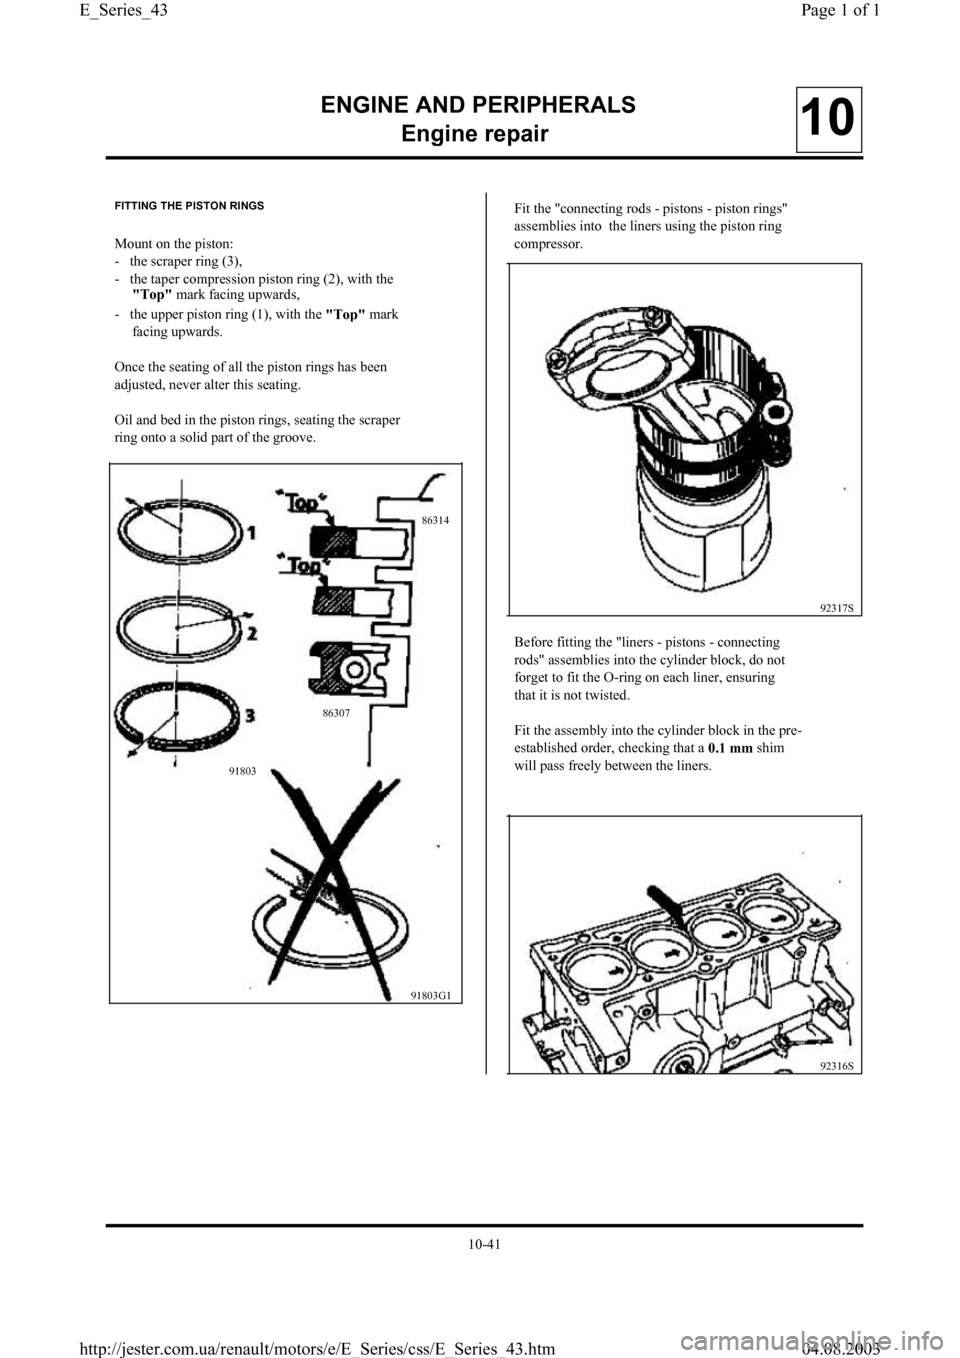 RENAULT CLIO 1997 X57 / 1.G Petrol Engines Workshop Manual ENGINE AND PERIPHERALS
En
gine repair10
92317S
91803G1 FITTING THE PISTON RINGS
Mount on the piston:
-   the scraper ring (3),
-   the taper compression piston ring (2), with the
"To
p" mark facing up